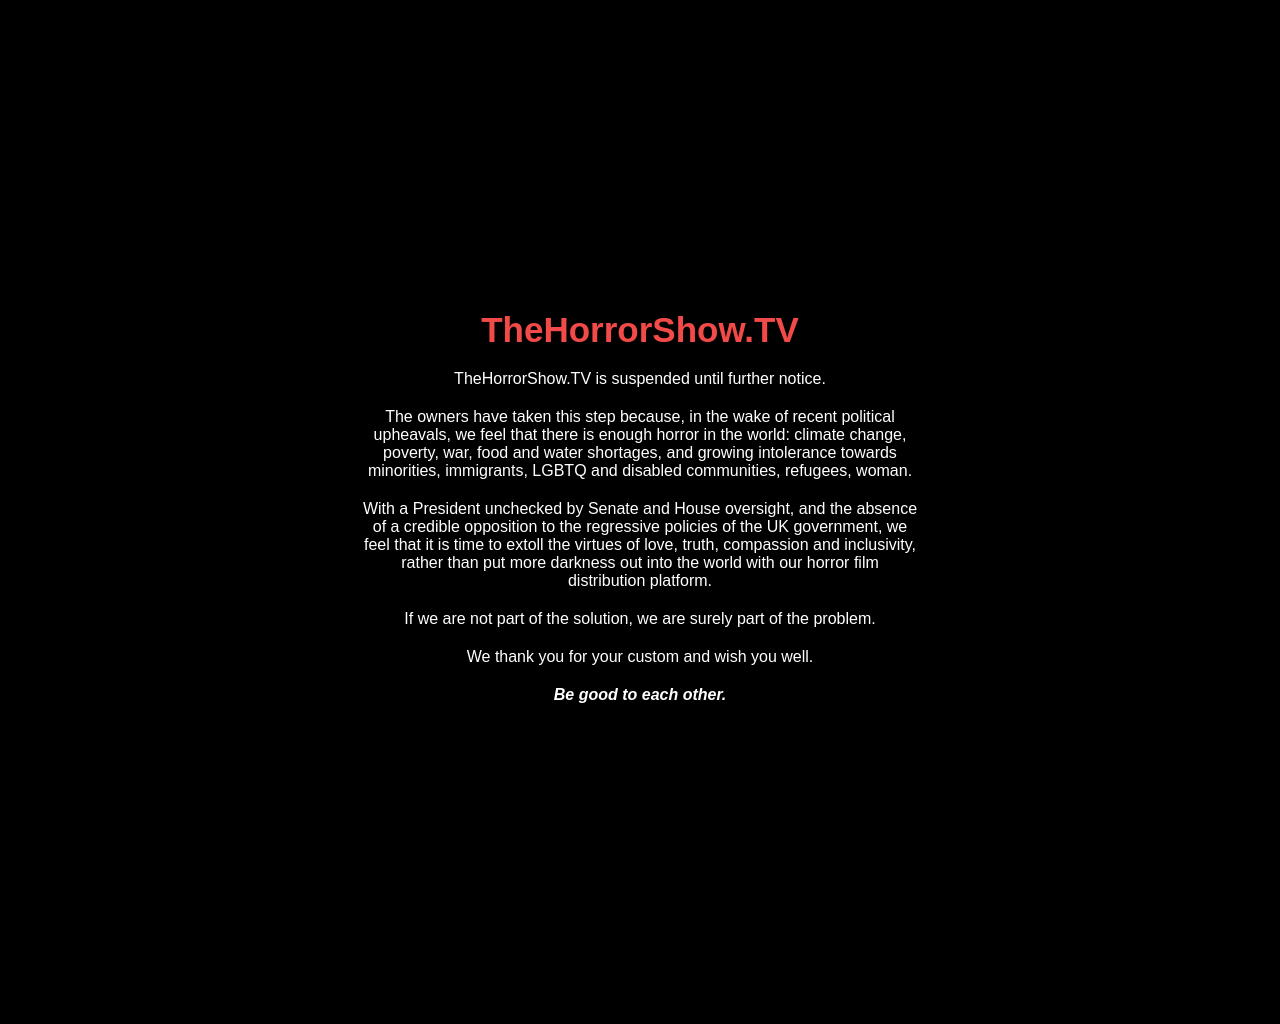 thehorrorshow.tv